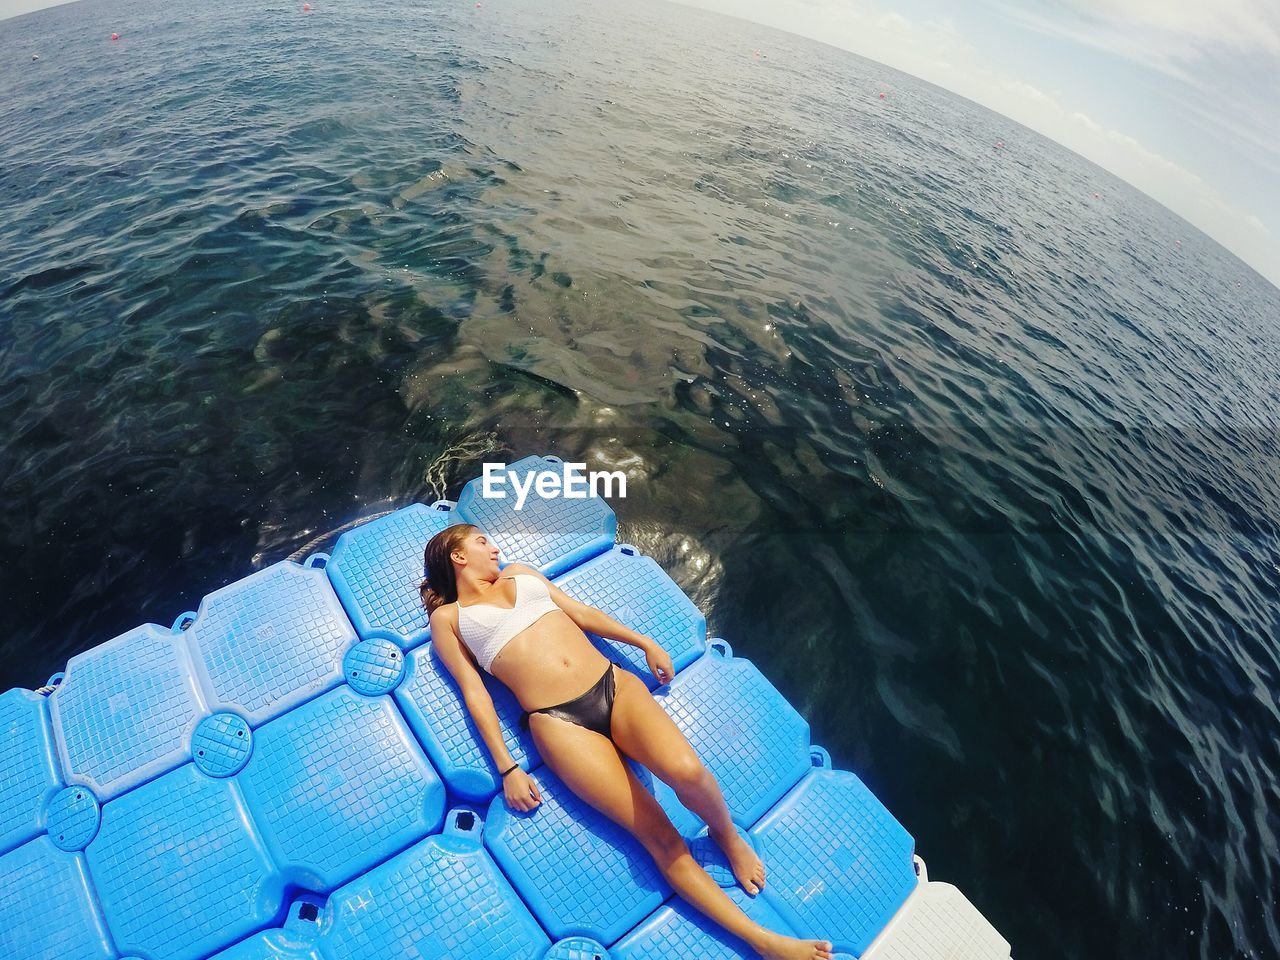 Woman relaxing on inflatable in sea